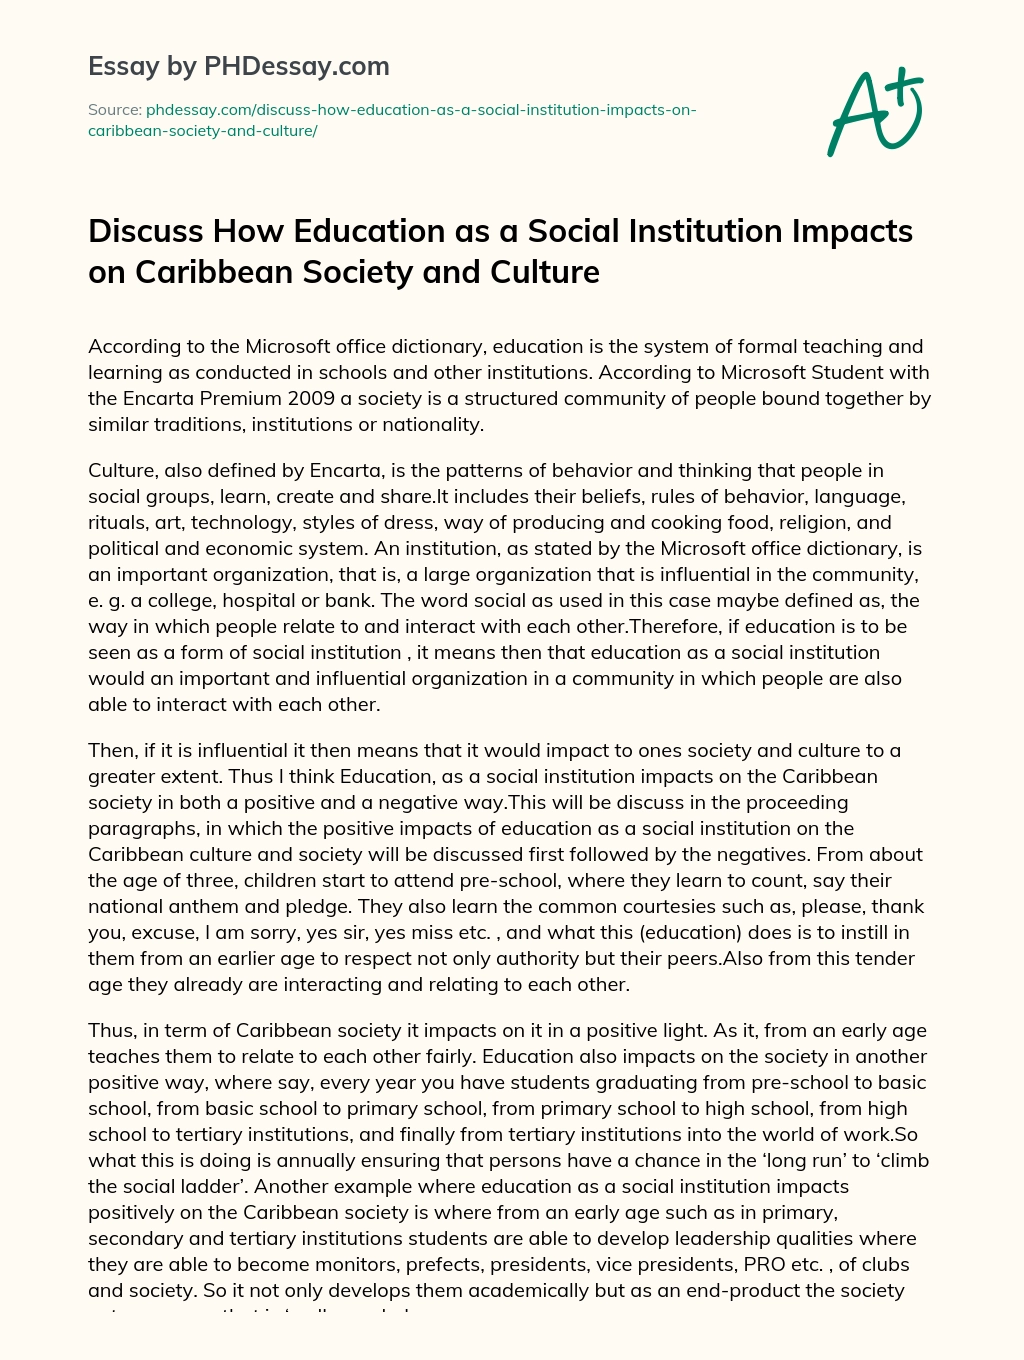 Discuss How Education as a Social Institution Impacts on Caribbean